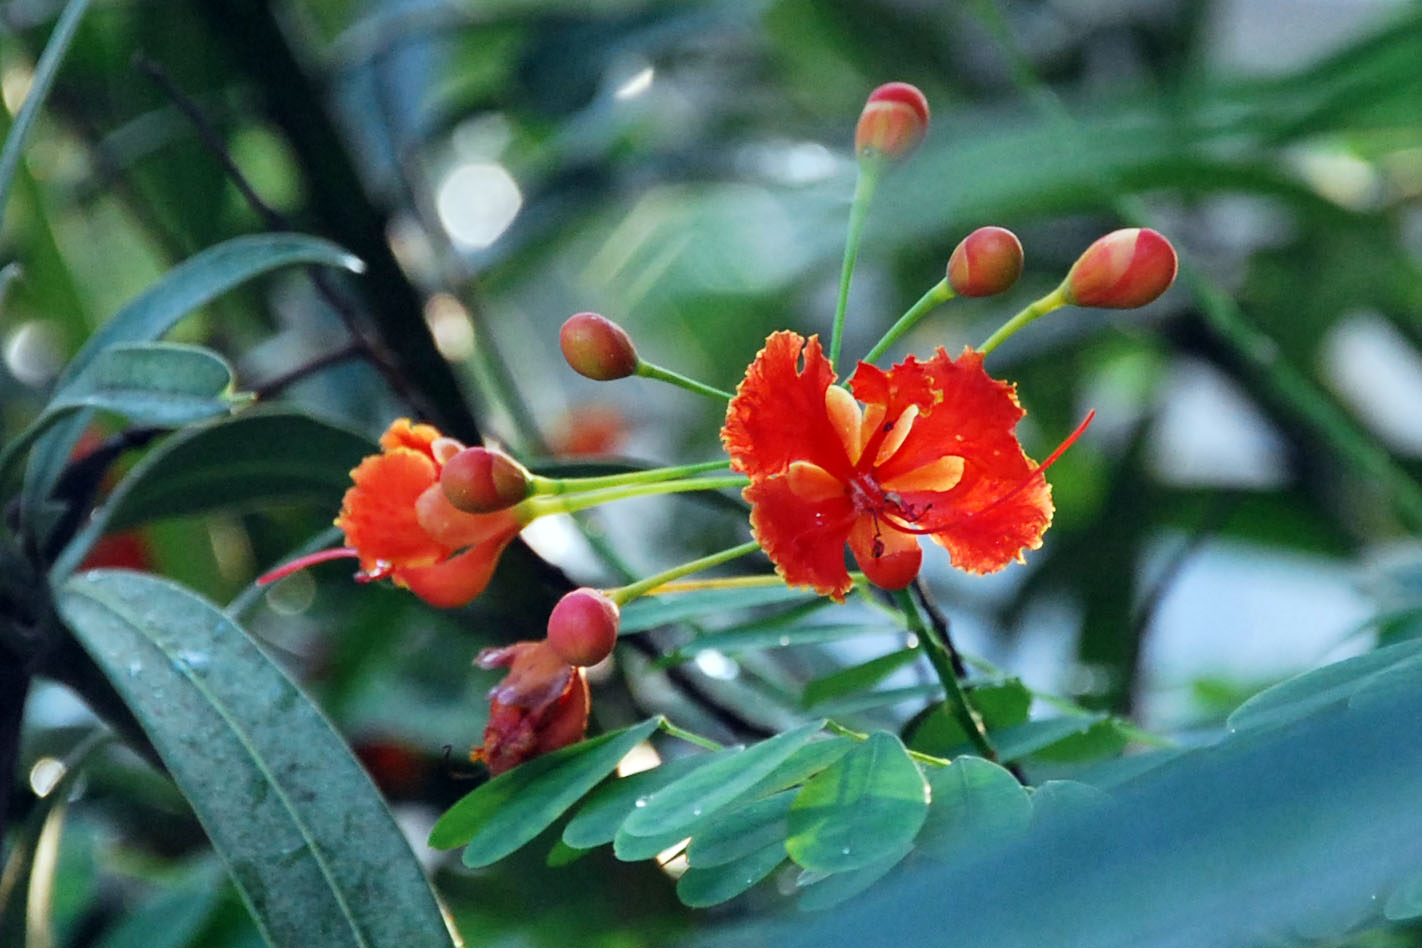 red flowers blooming in a tree with green leaves